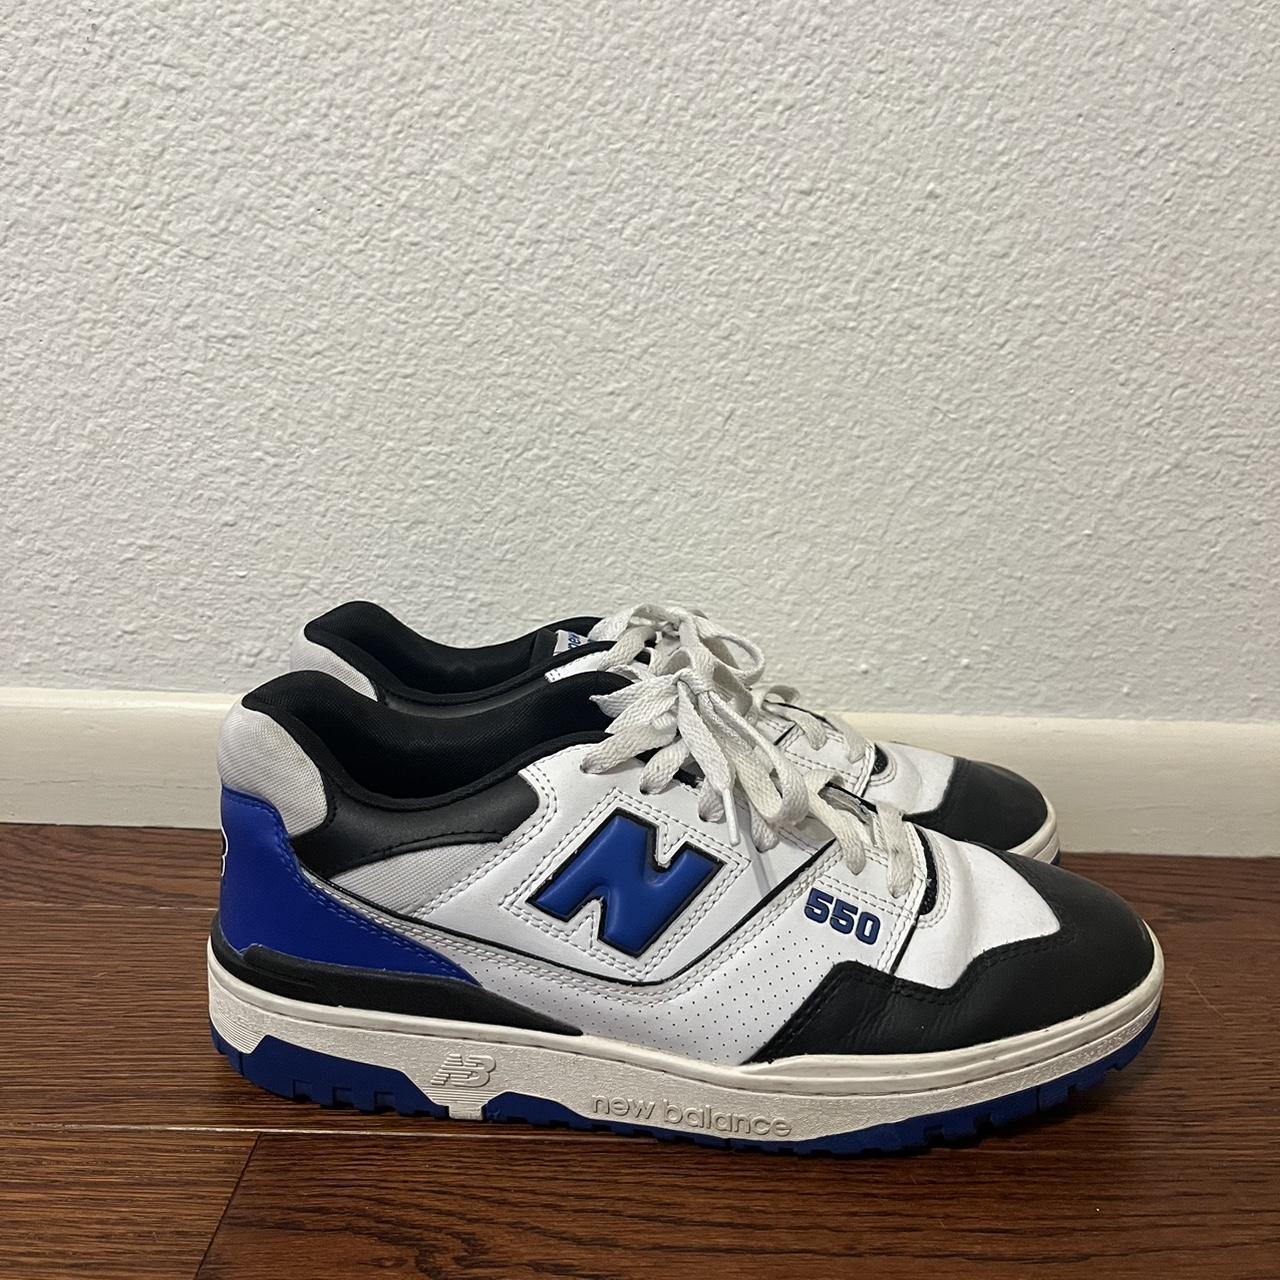 New Balance Men's Blue and Black Trainers (3)